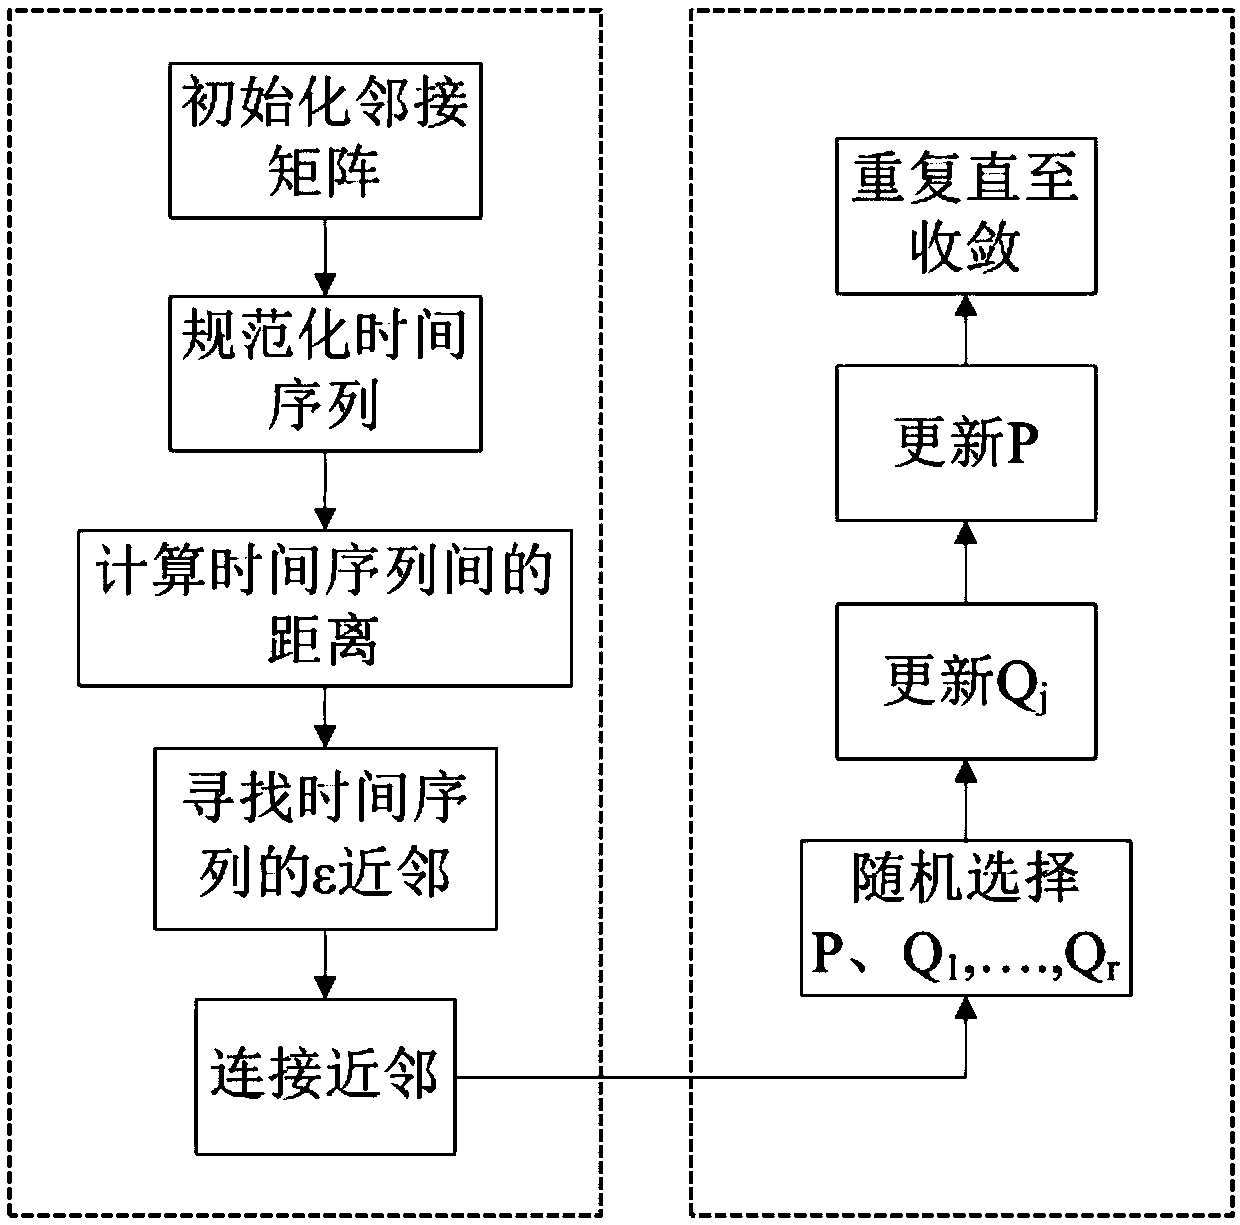 Multi-relation network-based MNMF clustering method of multi-variable time sequences